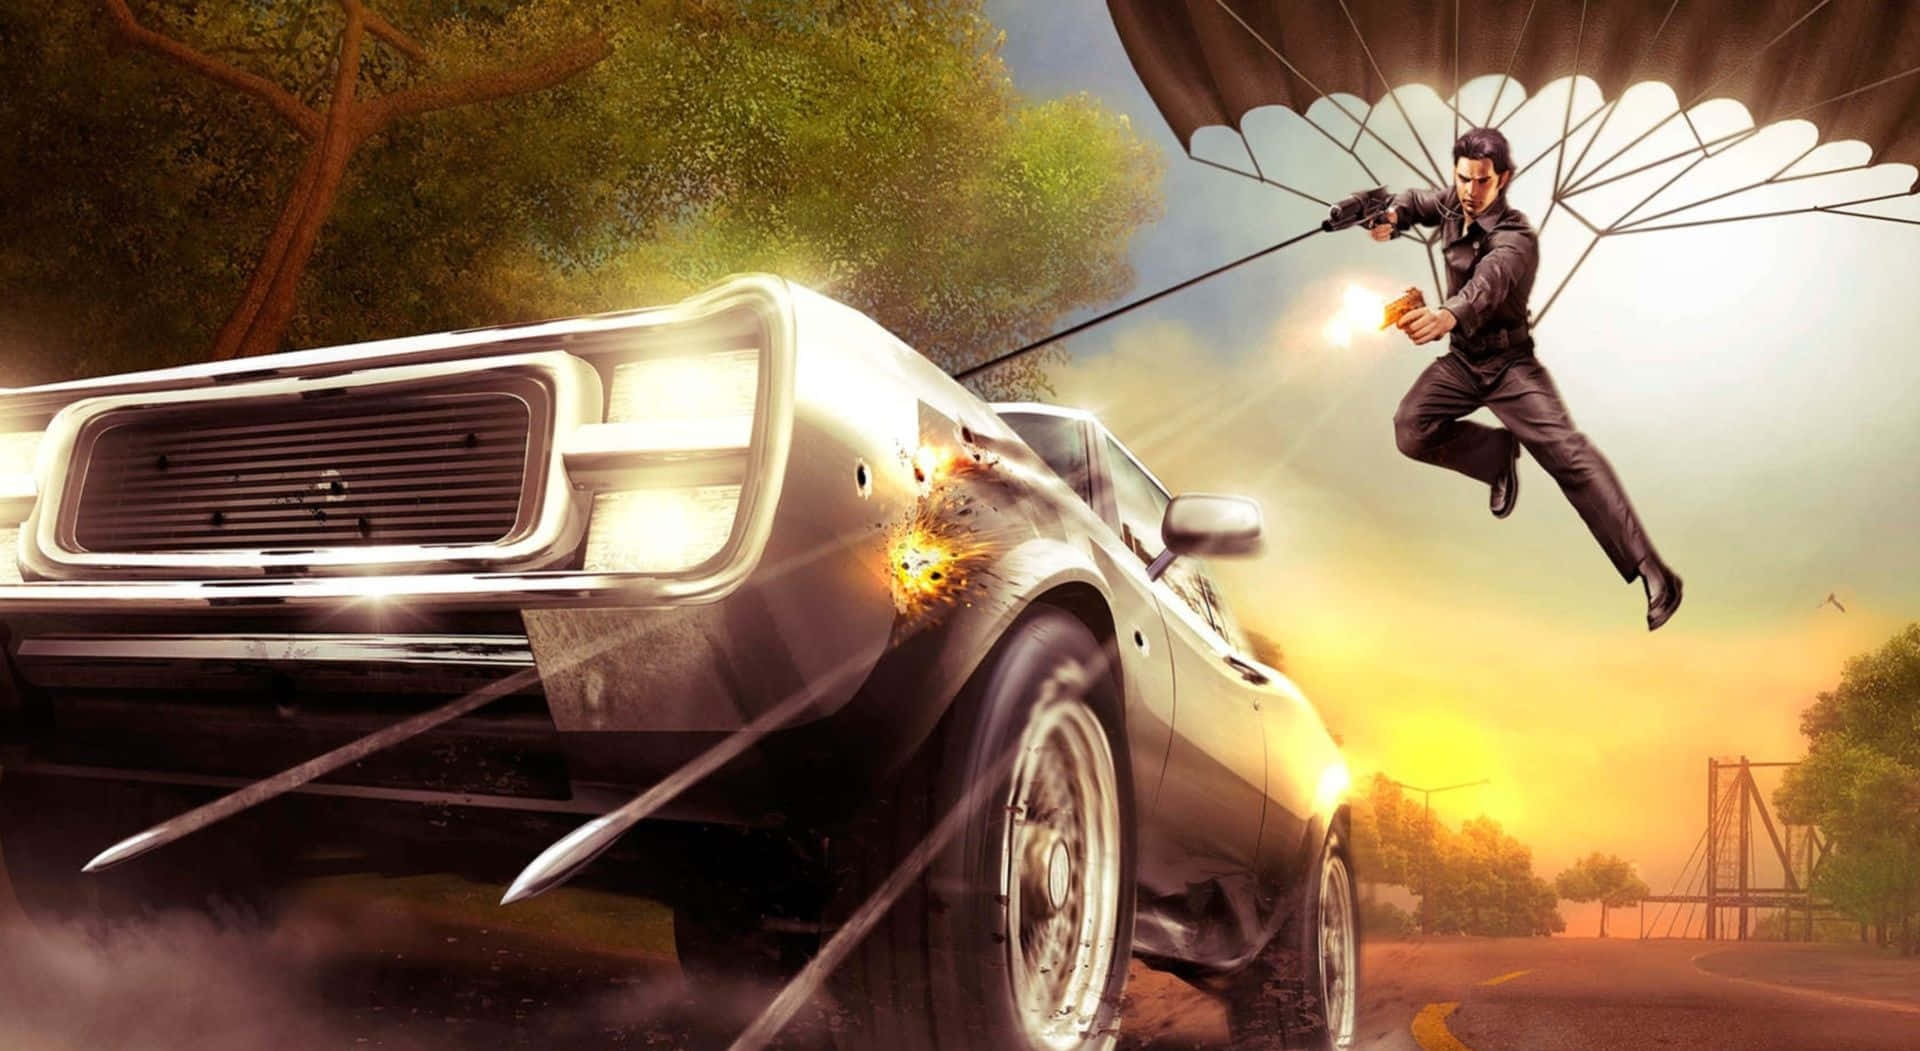 A Man Is Flying Over A Car With A Parachute Wallpaper